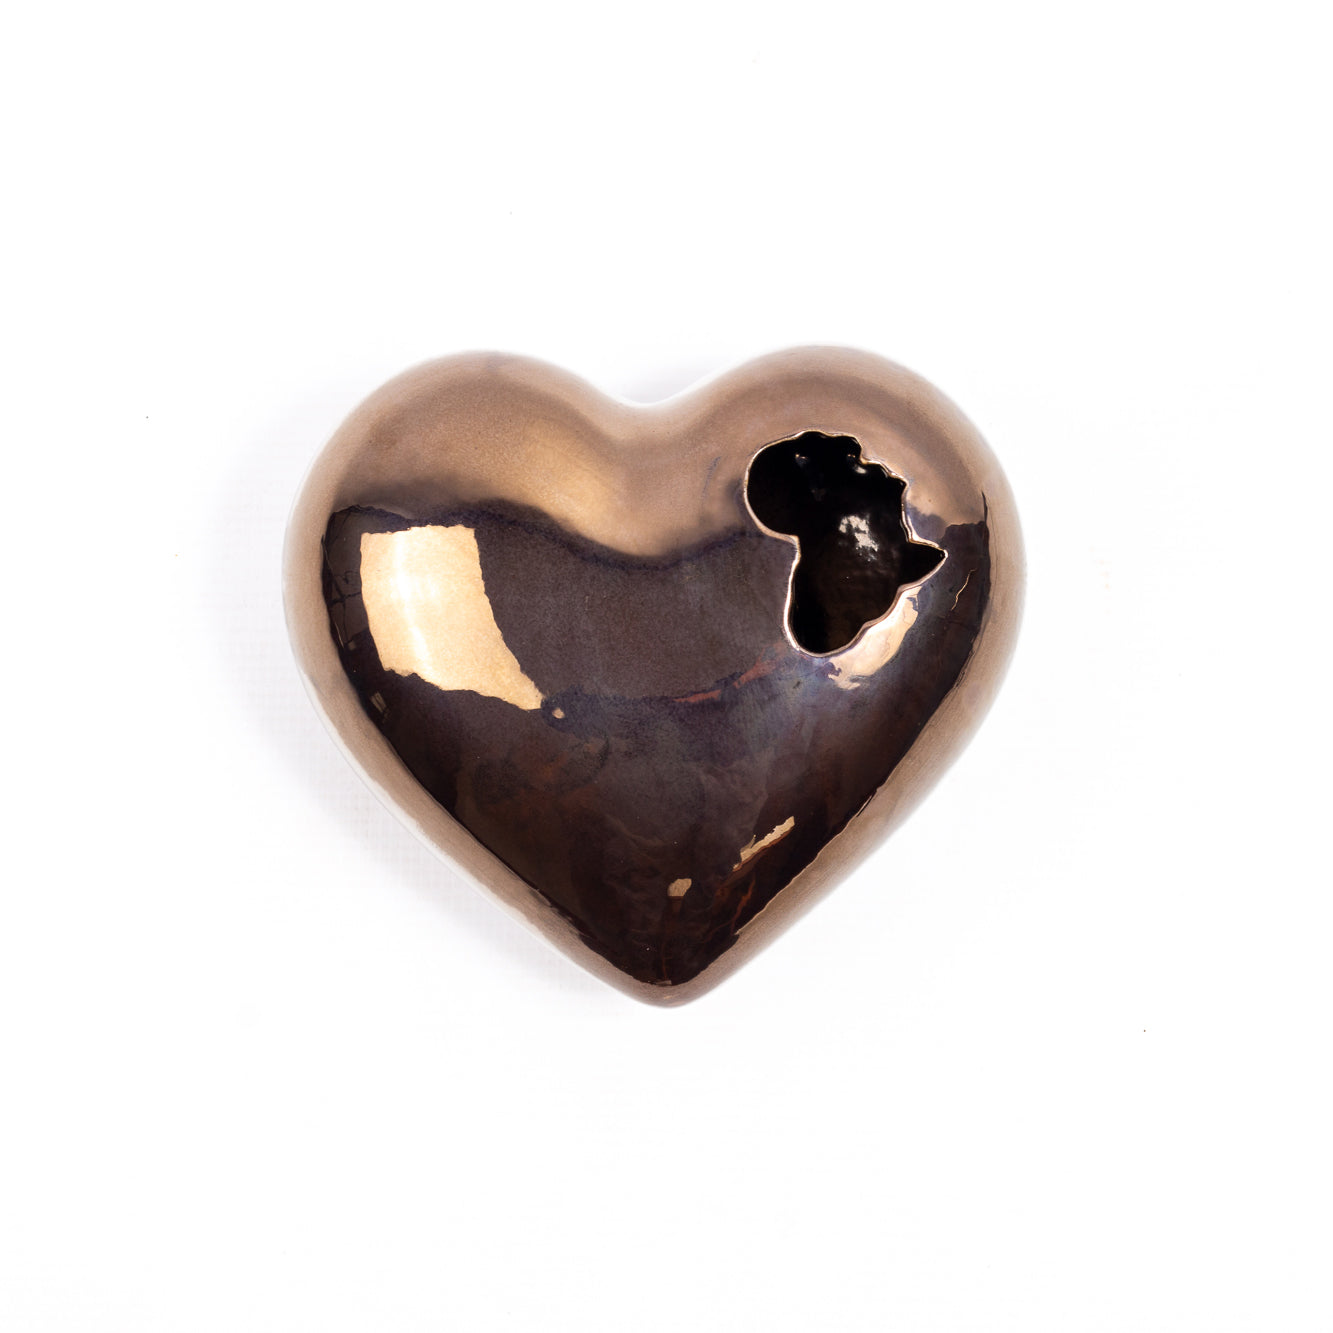 A handcrafted ceramic heart-shaped wall art piece, with intricate details and an African-inspired design, perfect for adding a touch of cultural pride and beauty to any home decor.